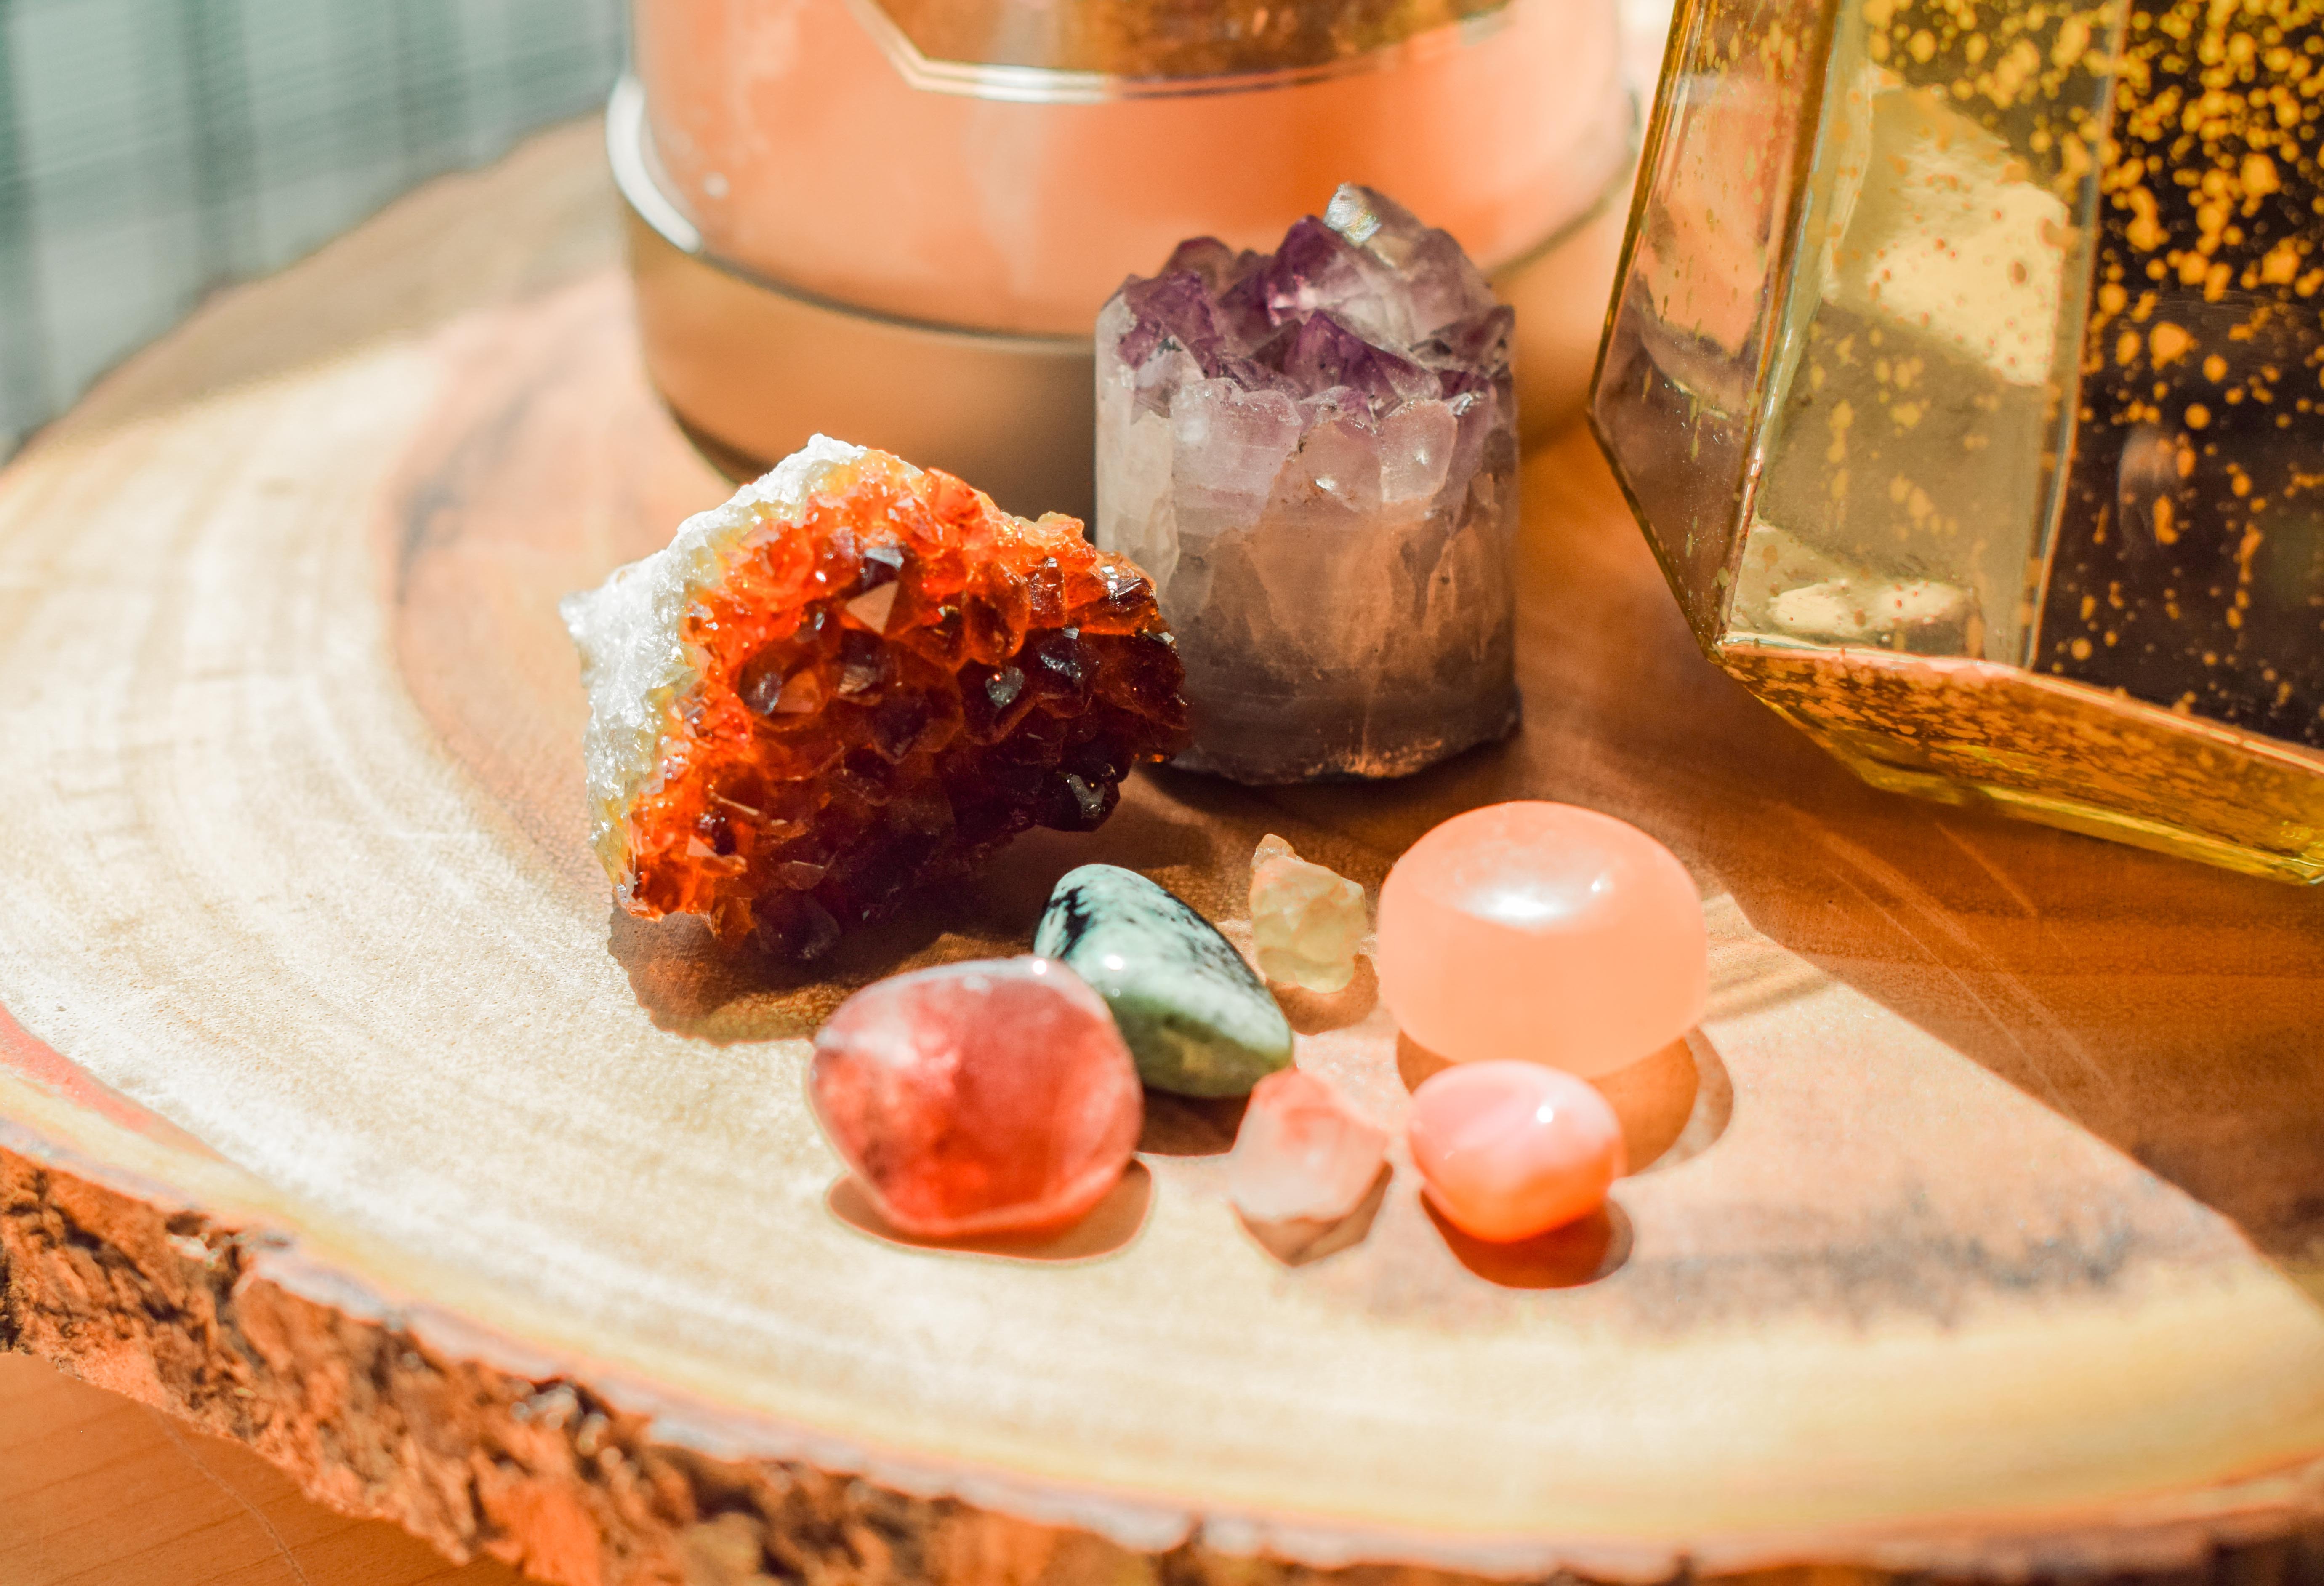 What Crystals Should Not Be in Your Bedroom?